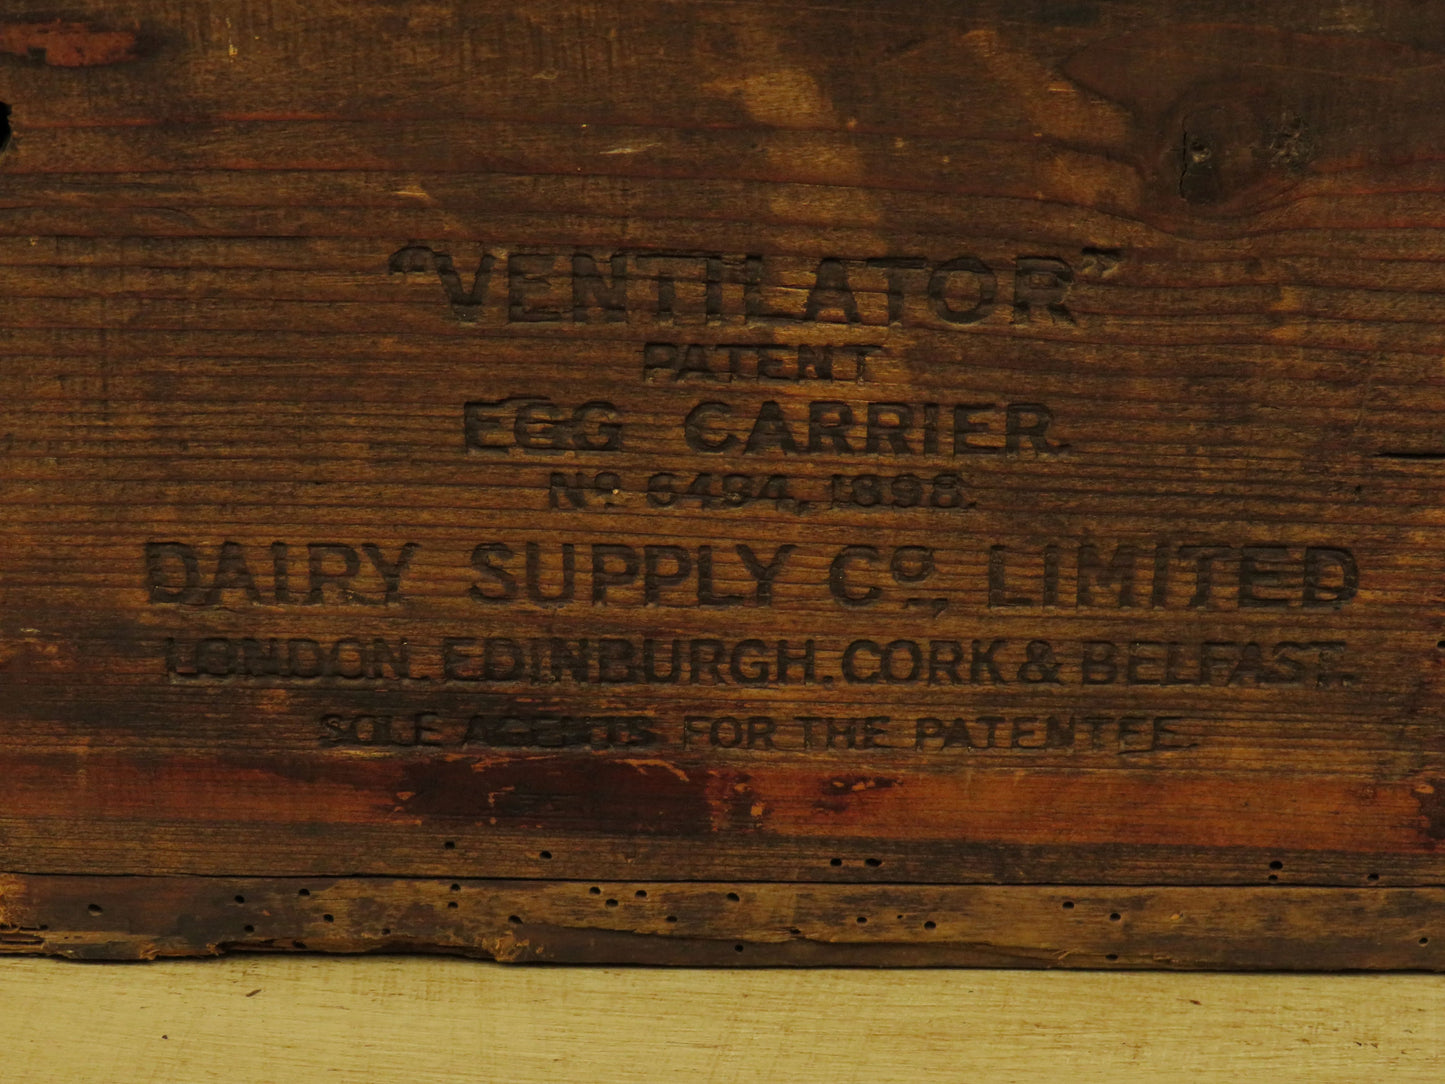 Rare Vintage Wooden 'Ventilator' patented Egg Crate, Dairy Supply Co